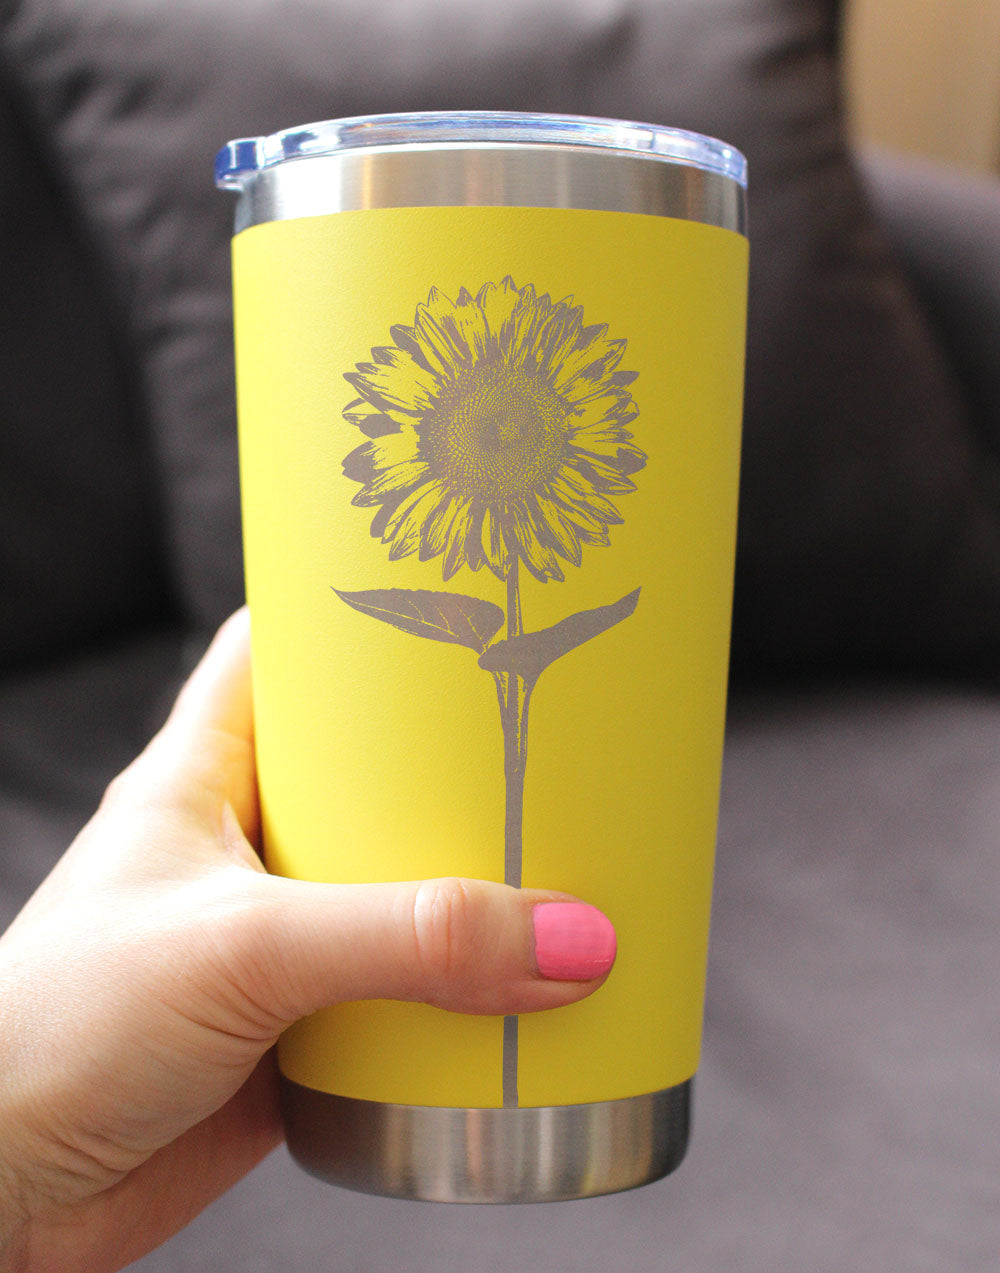 Sunflower - Insulated Coffee Tumbler Cup with Sliding Lid - Stainless Steel Insulated Mug - Flower Décor Gifts